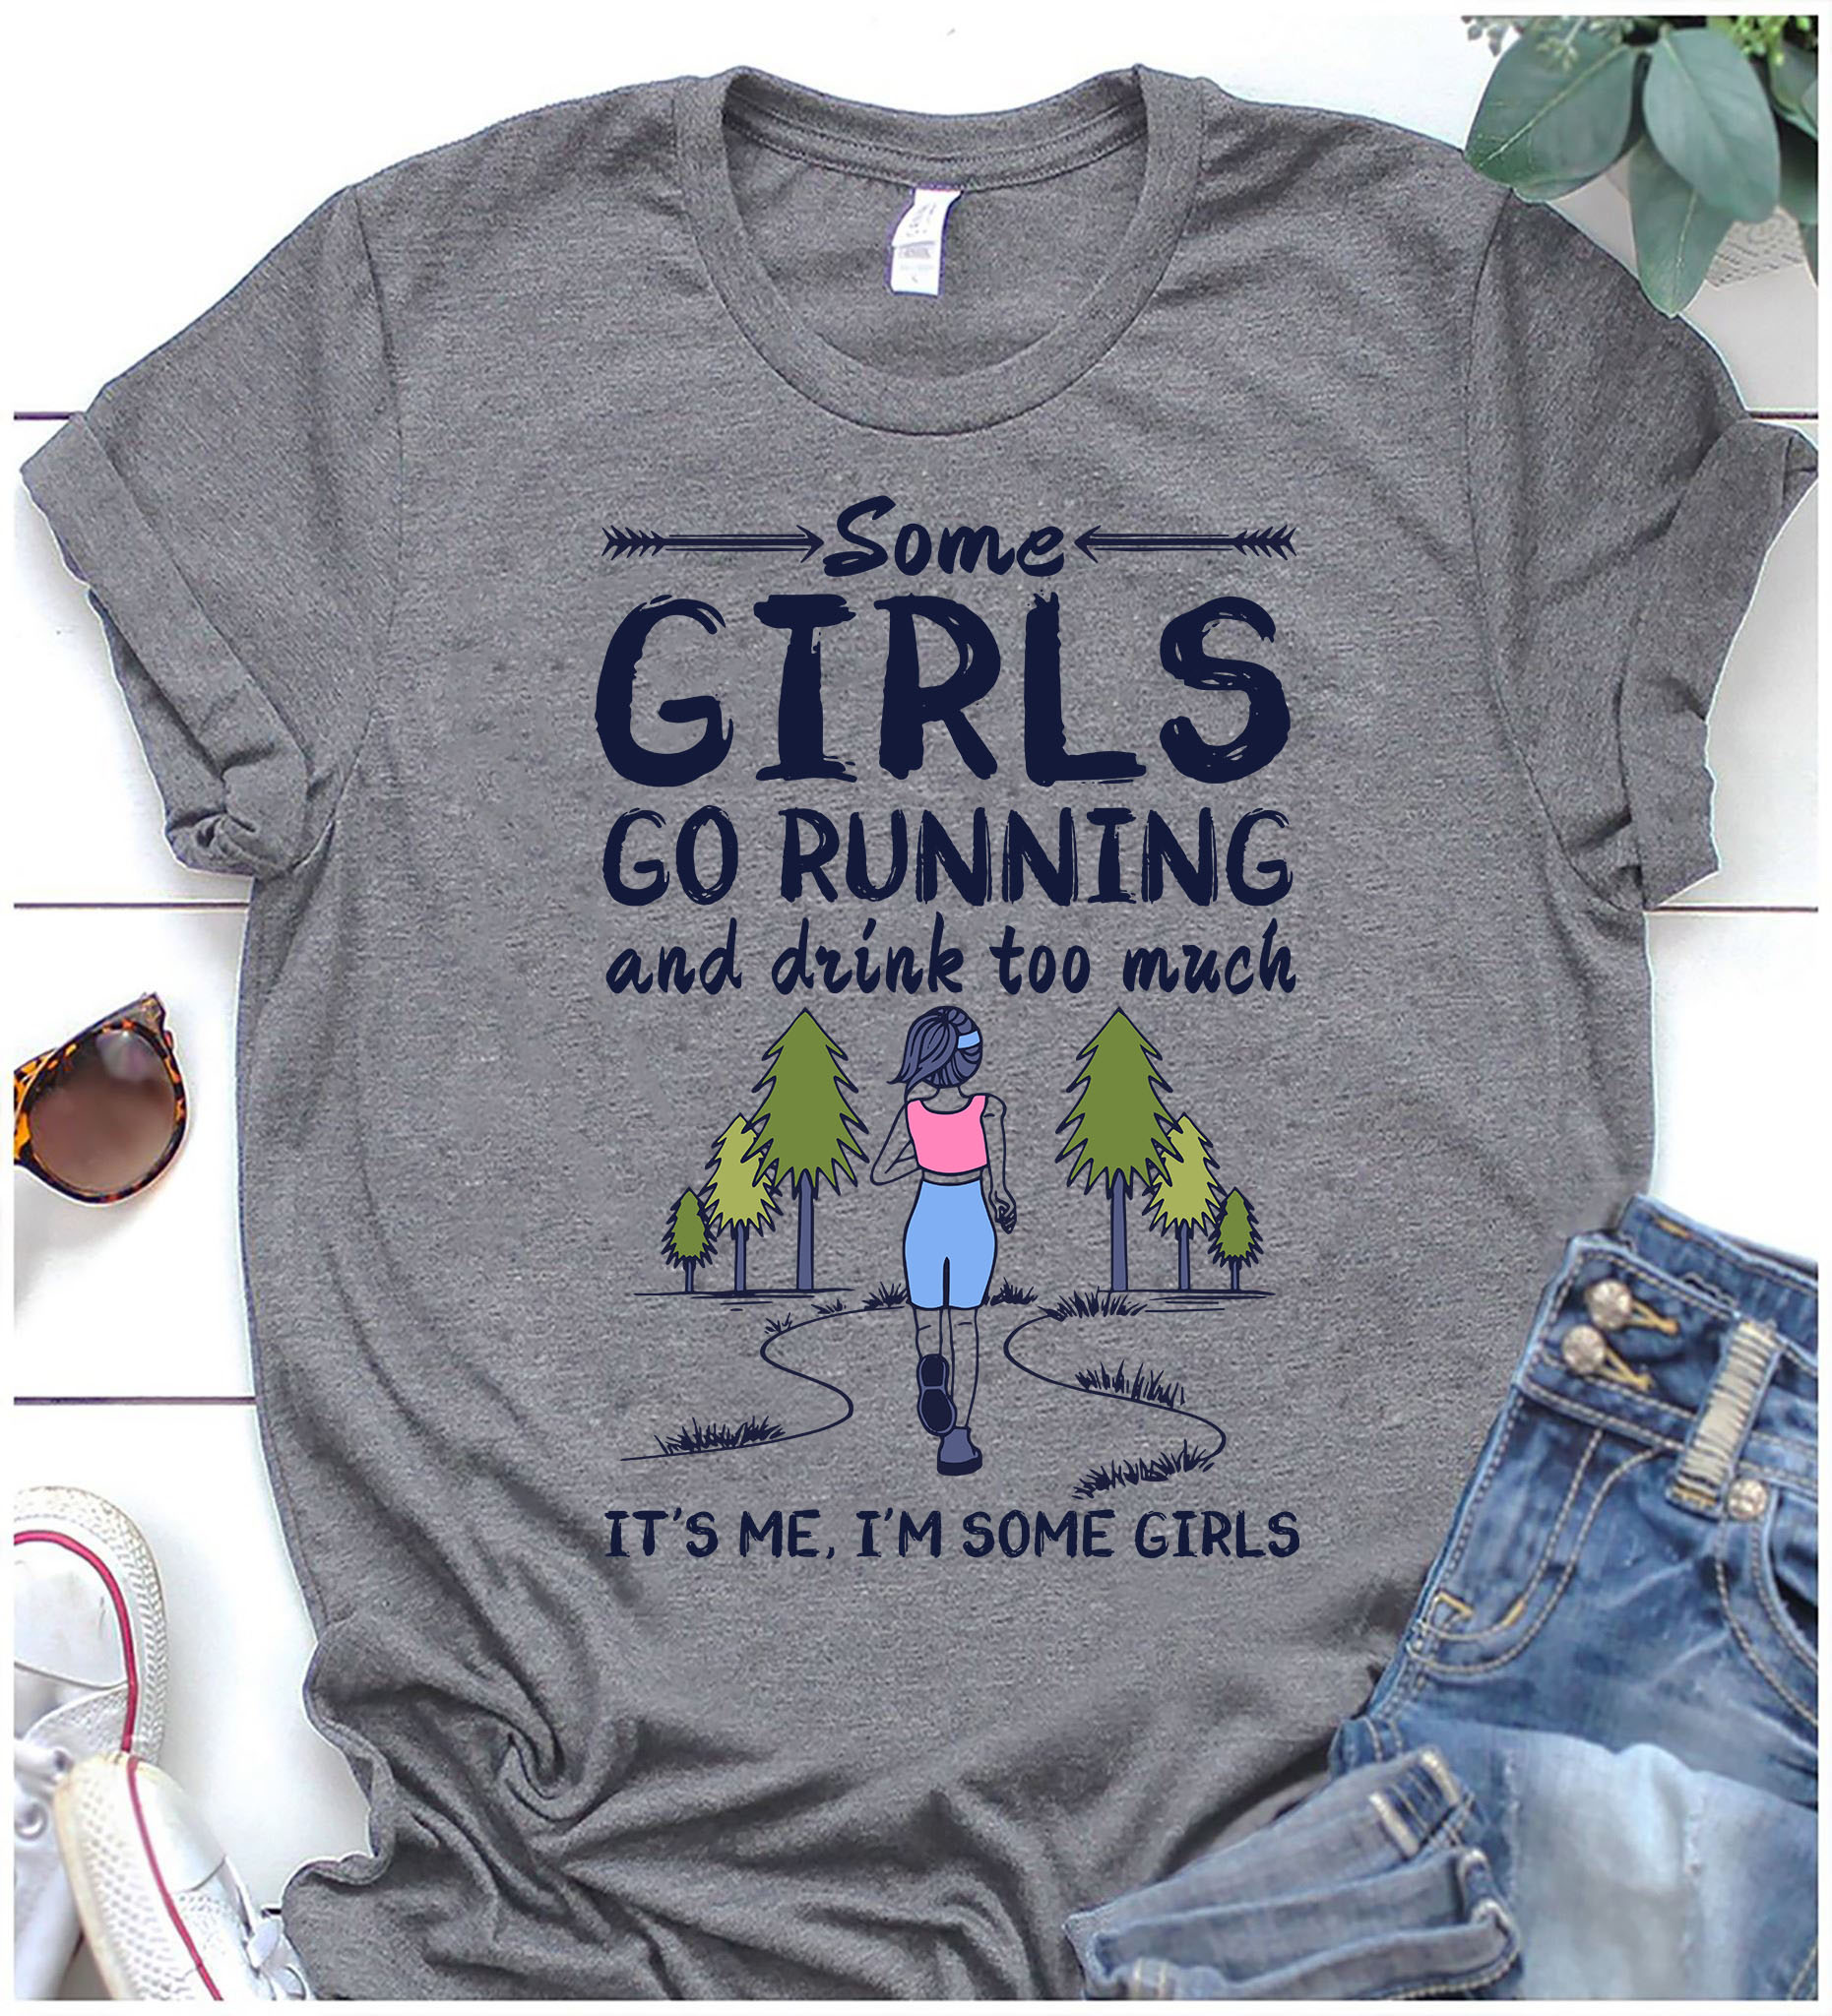 Some girls go running and drink too much - Girls running